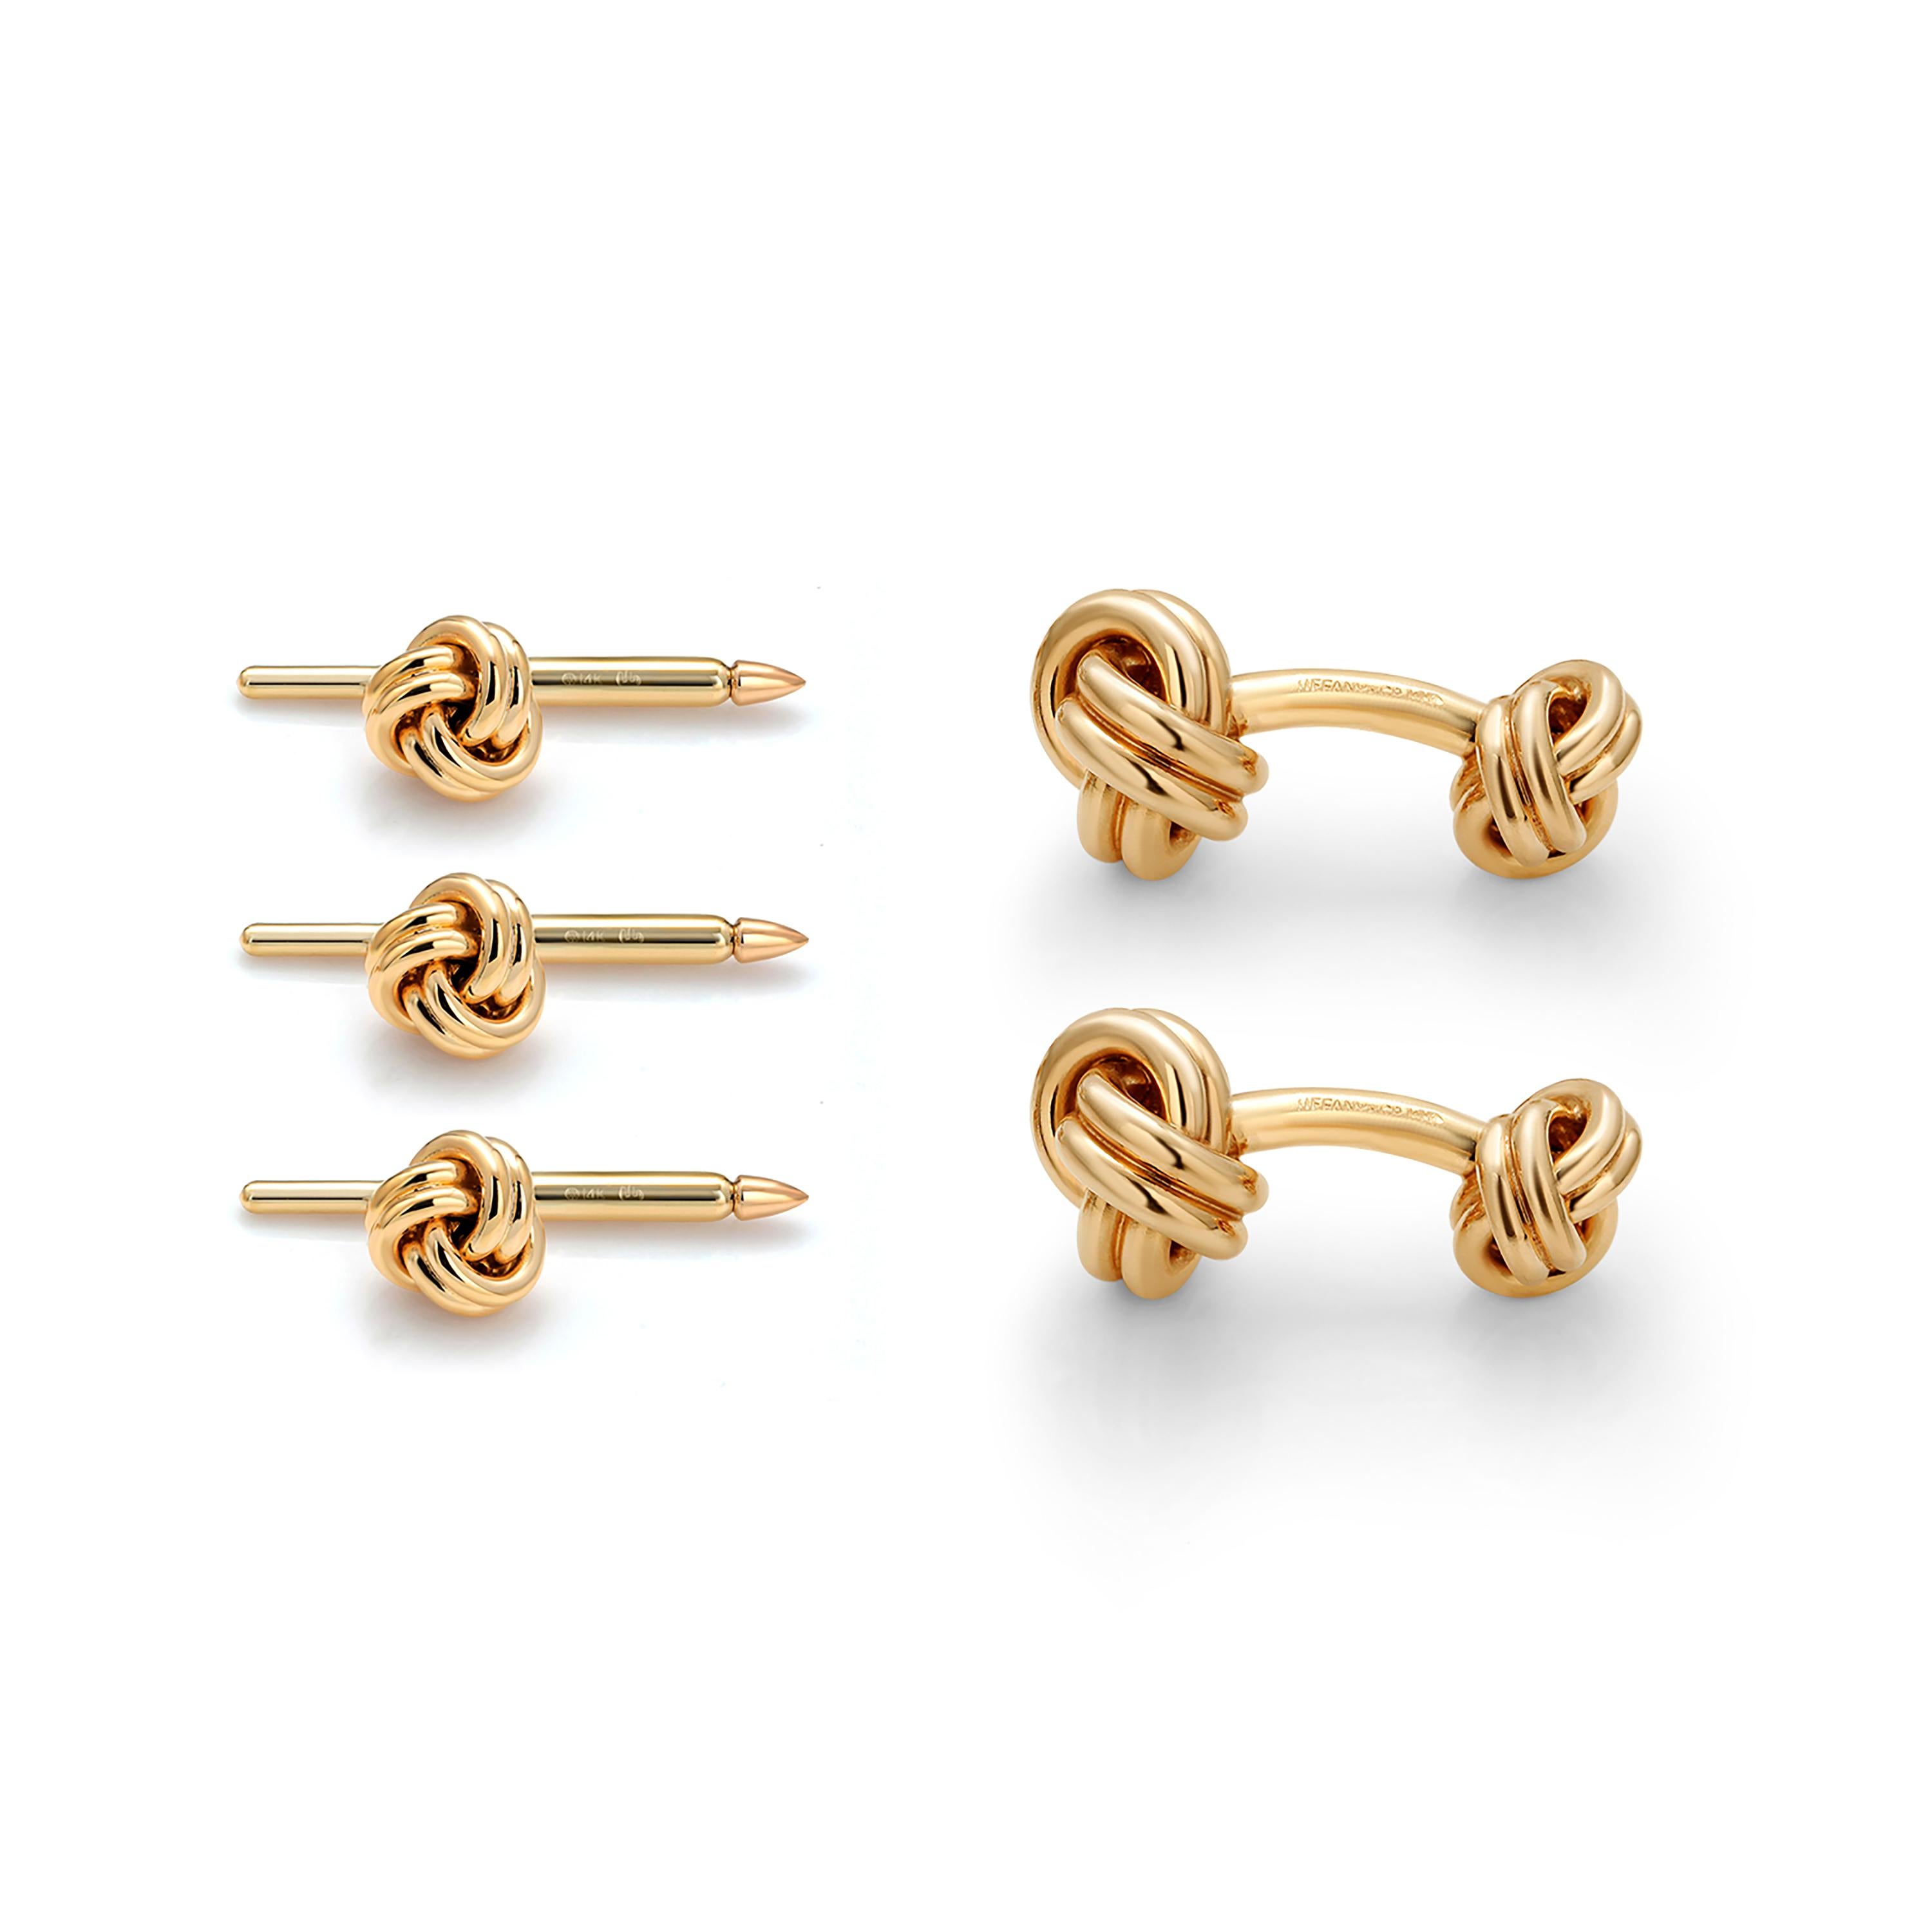 Contemporary Tiffany and Co. Yellow Gold Double Knot Cufflinks and Three Shirt Studs